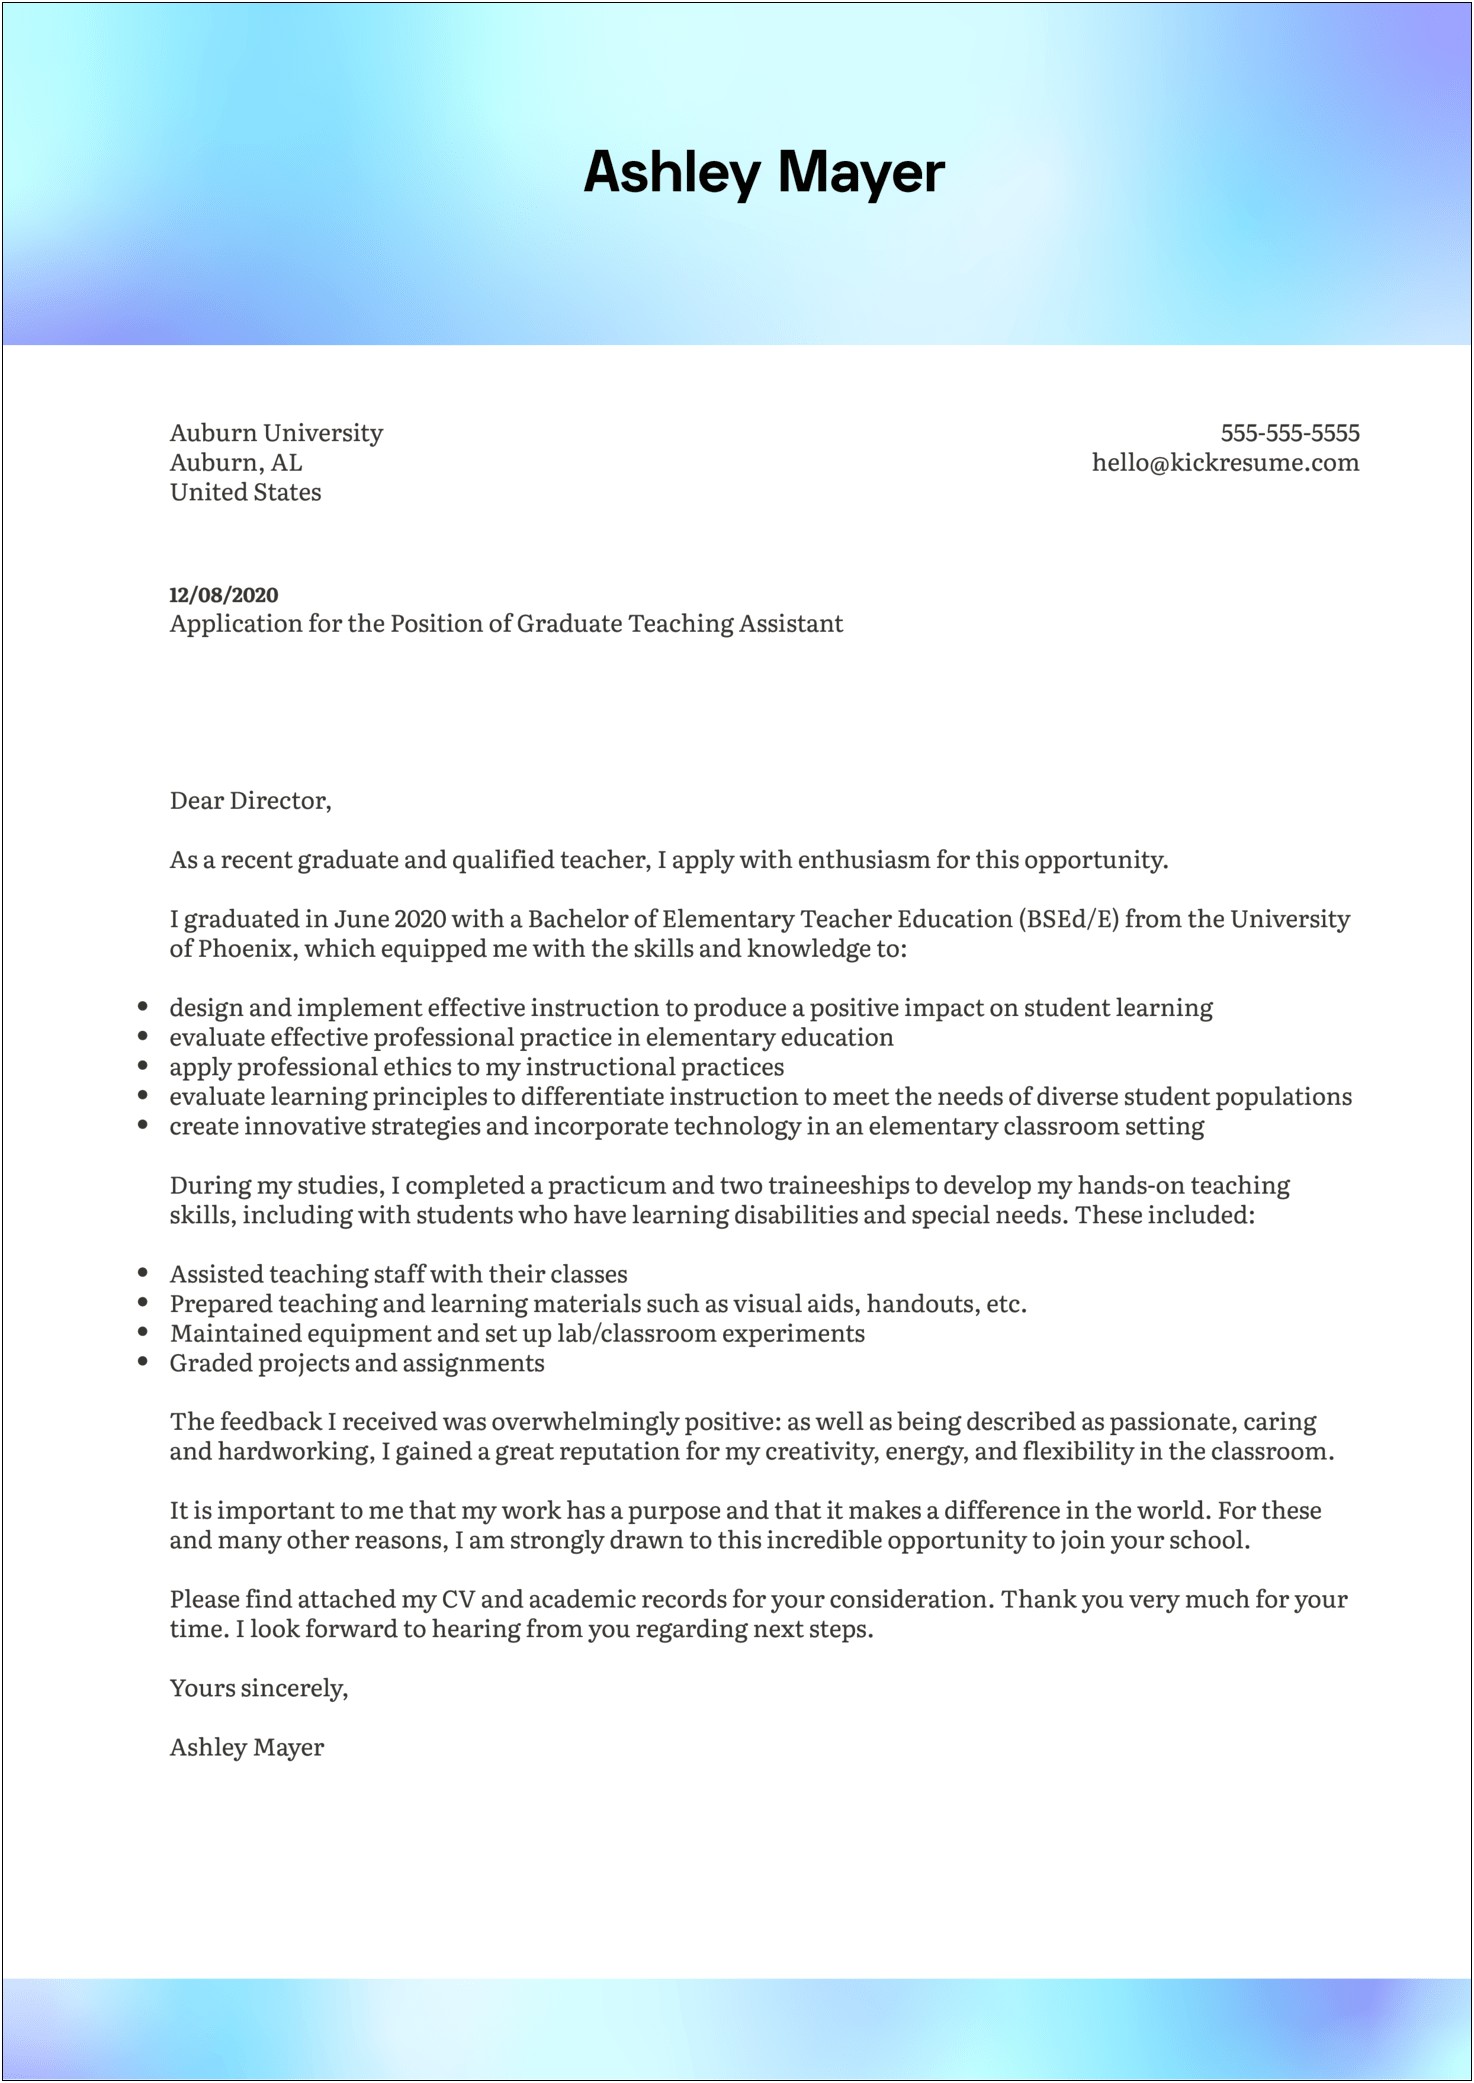 Sample Resume Cover Letter For Recent College Graduate